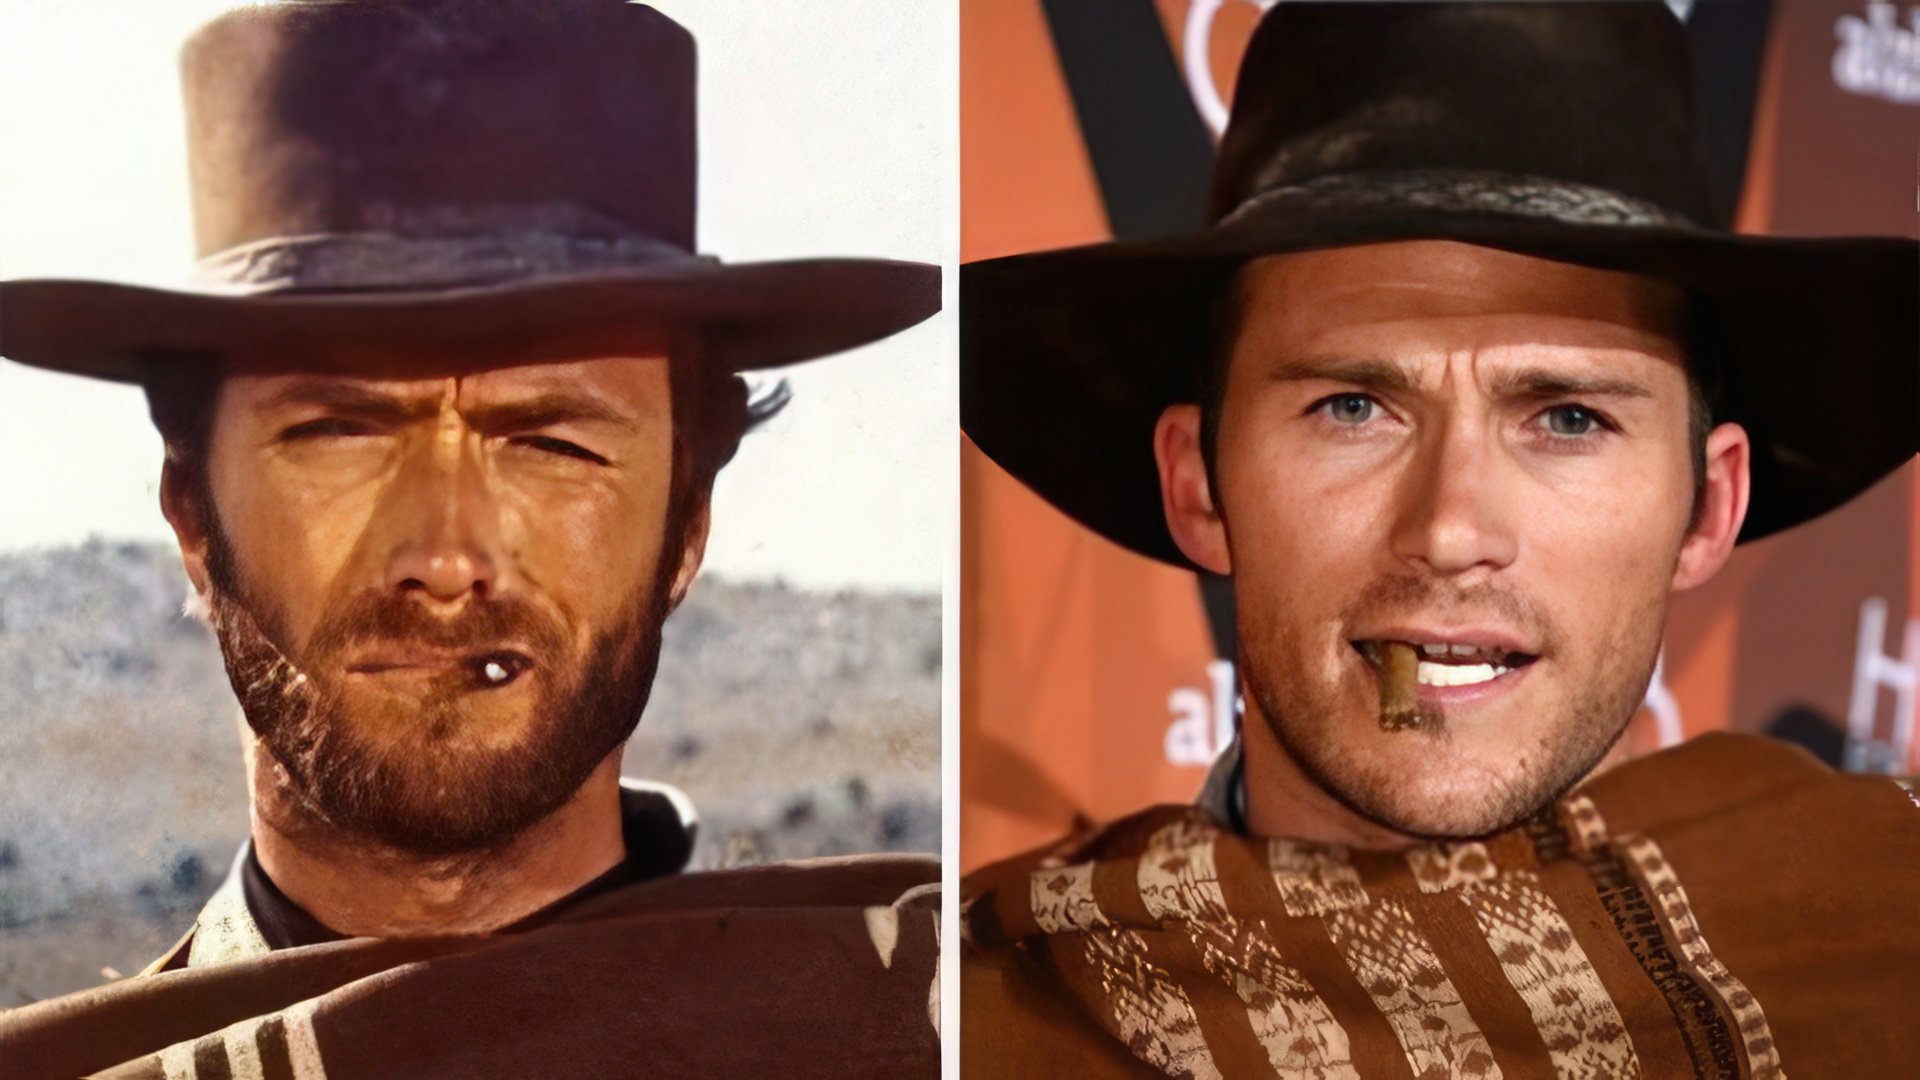 Scott Eastwood like the main character in the movie The Good, the Bad and the Ugly